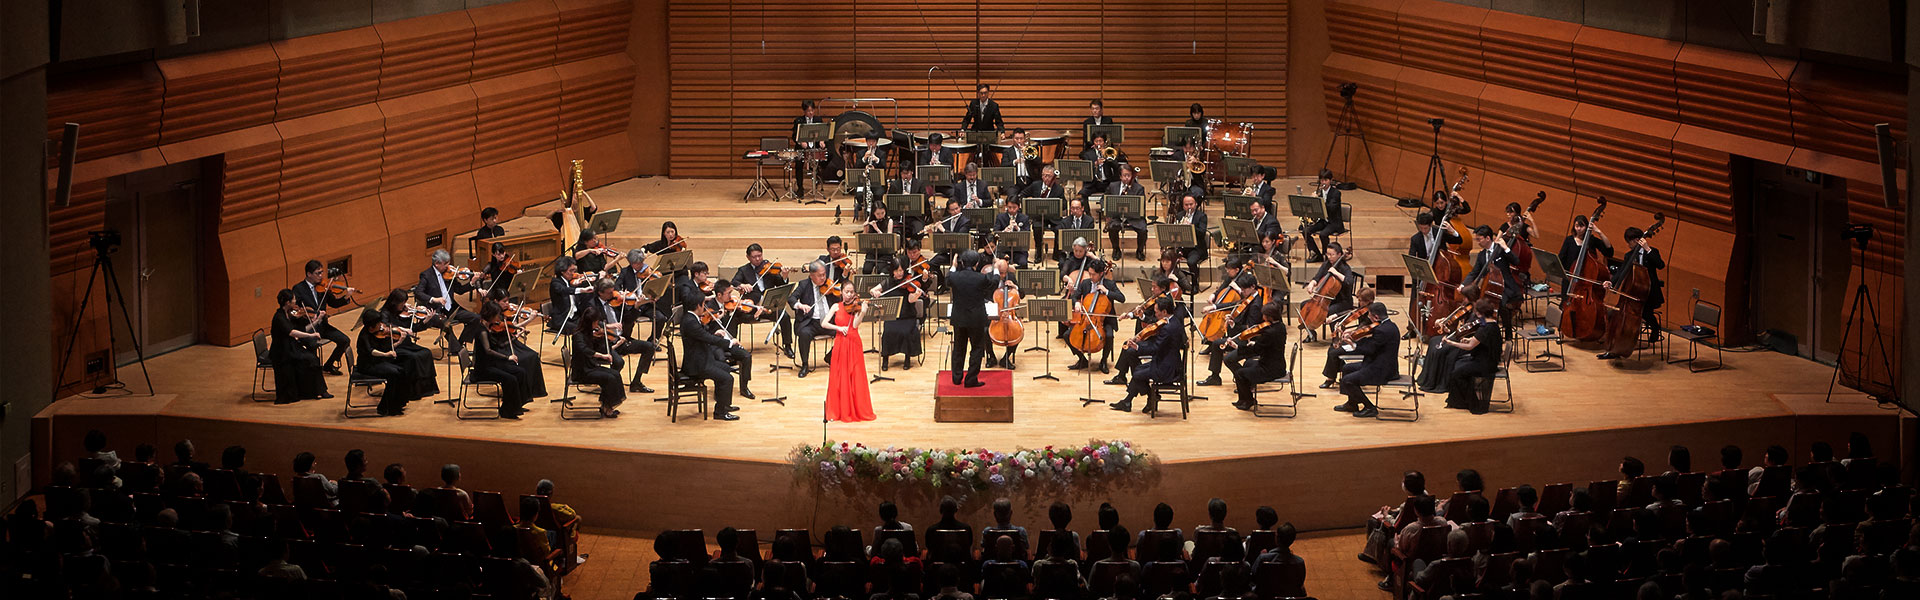 Prelude to the Competition – Three soloists’ invitation to the world of concerto – | Sendai International Music Competition Official Website